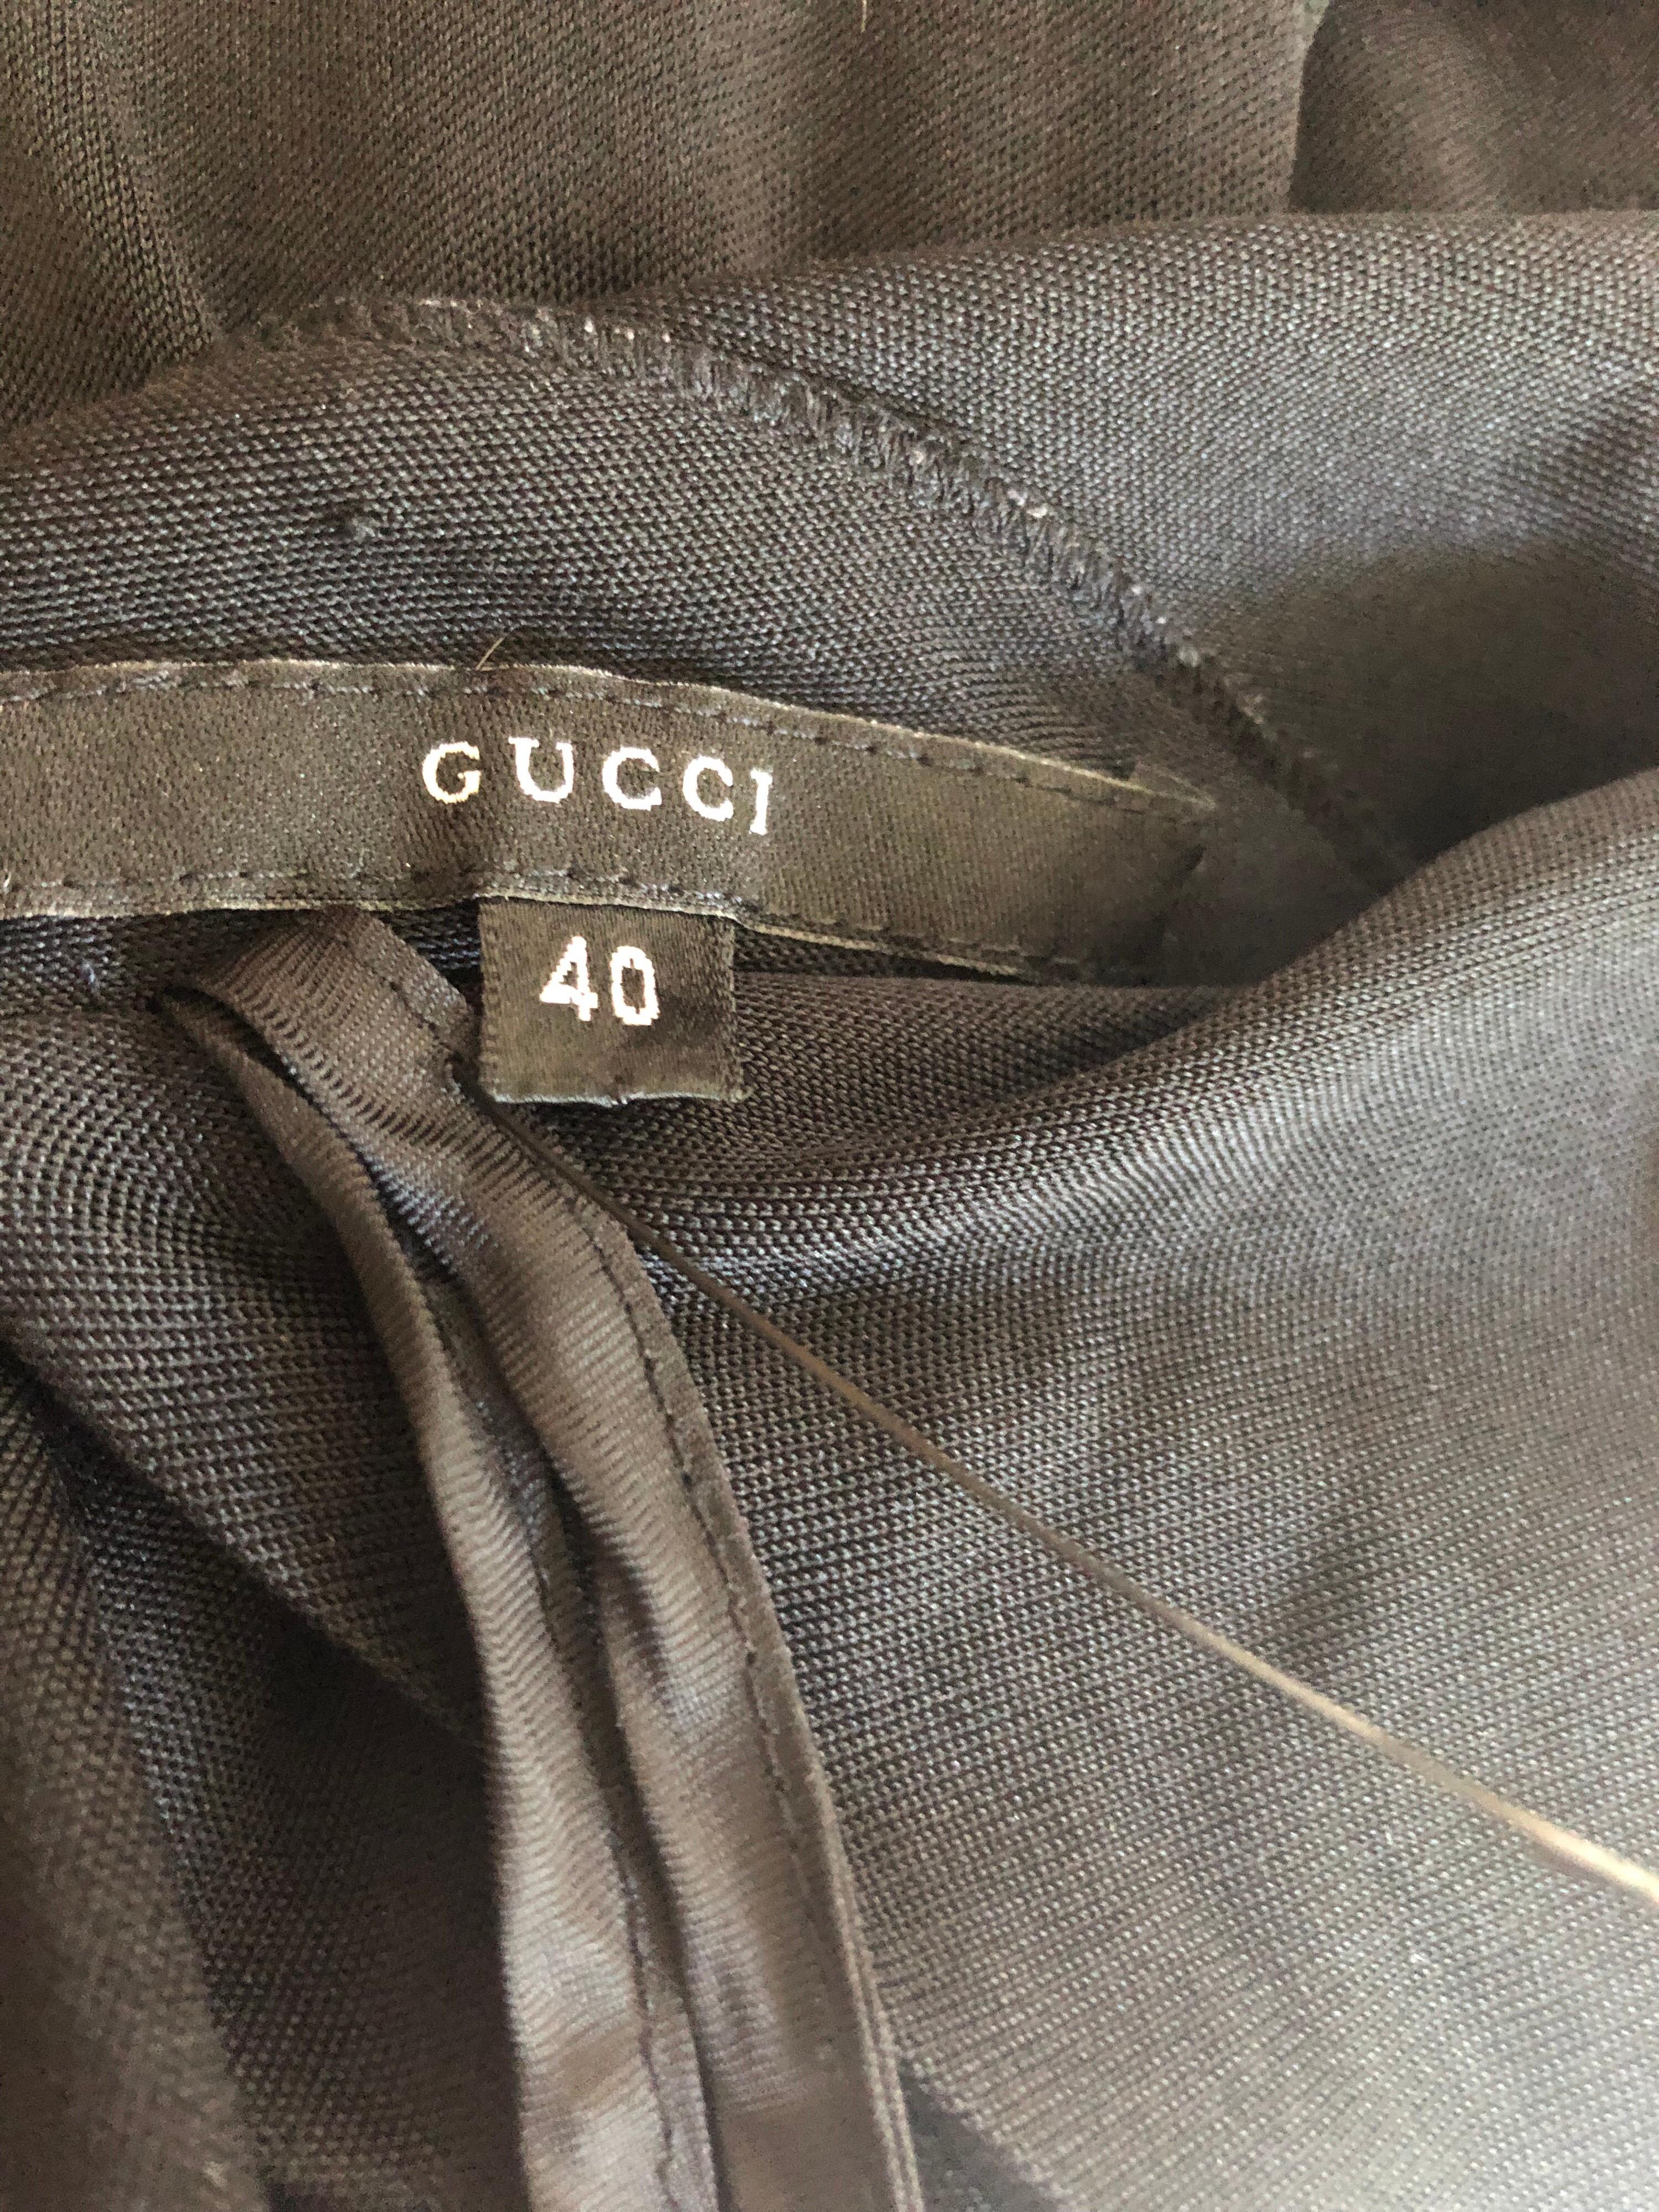 1999 Gucci by Tom Ford Silk Draped Open Back Black Dress Gown In Good Condition For Sale In Naples, FL